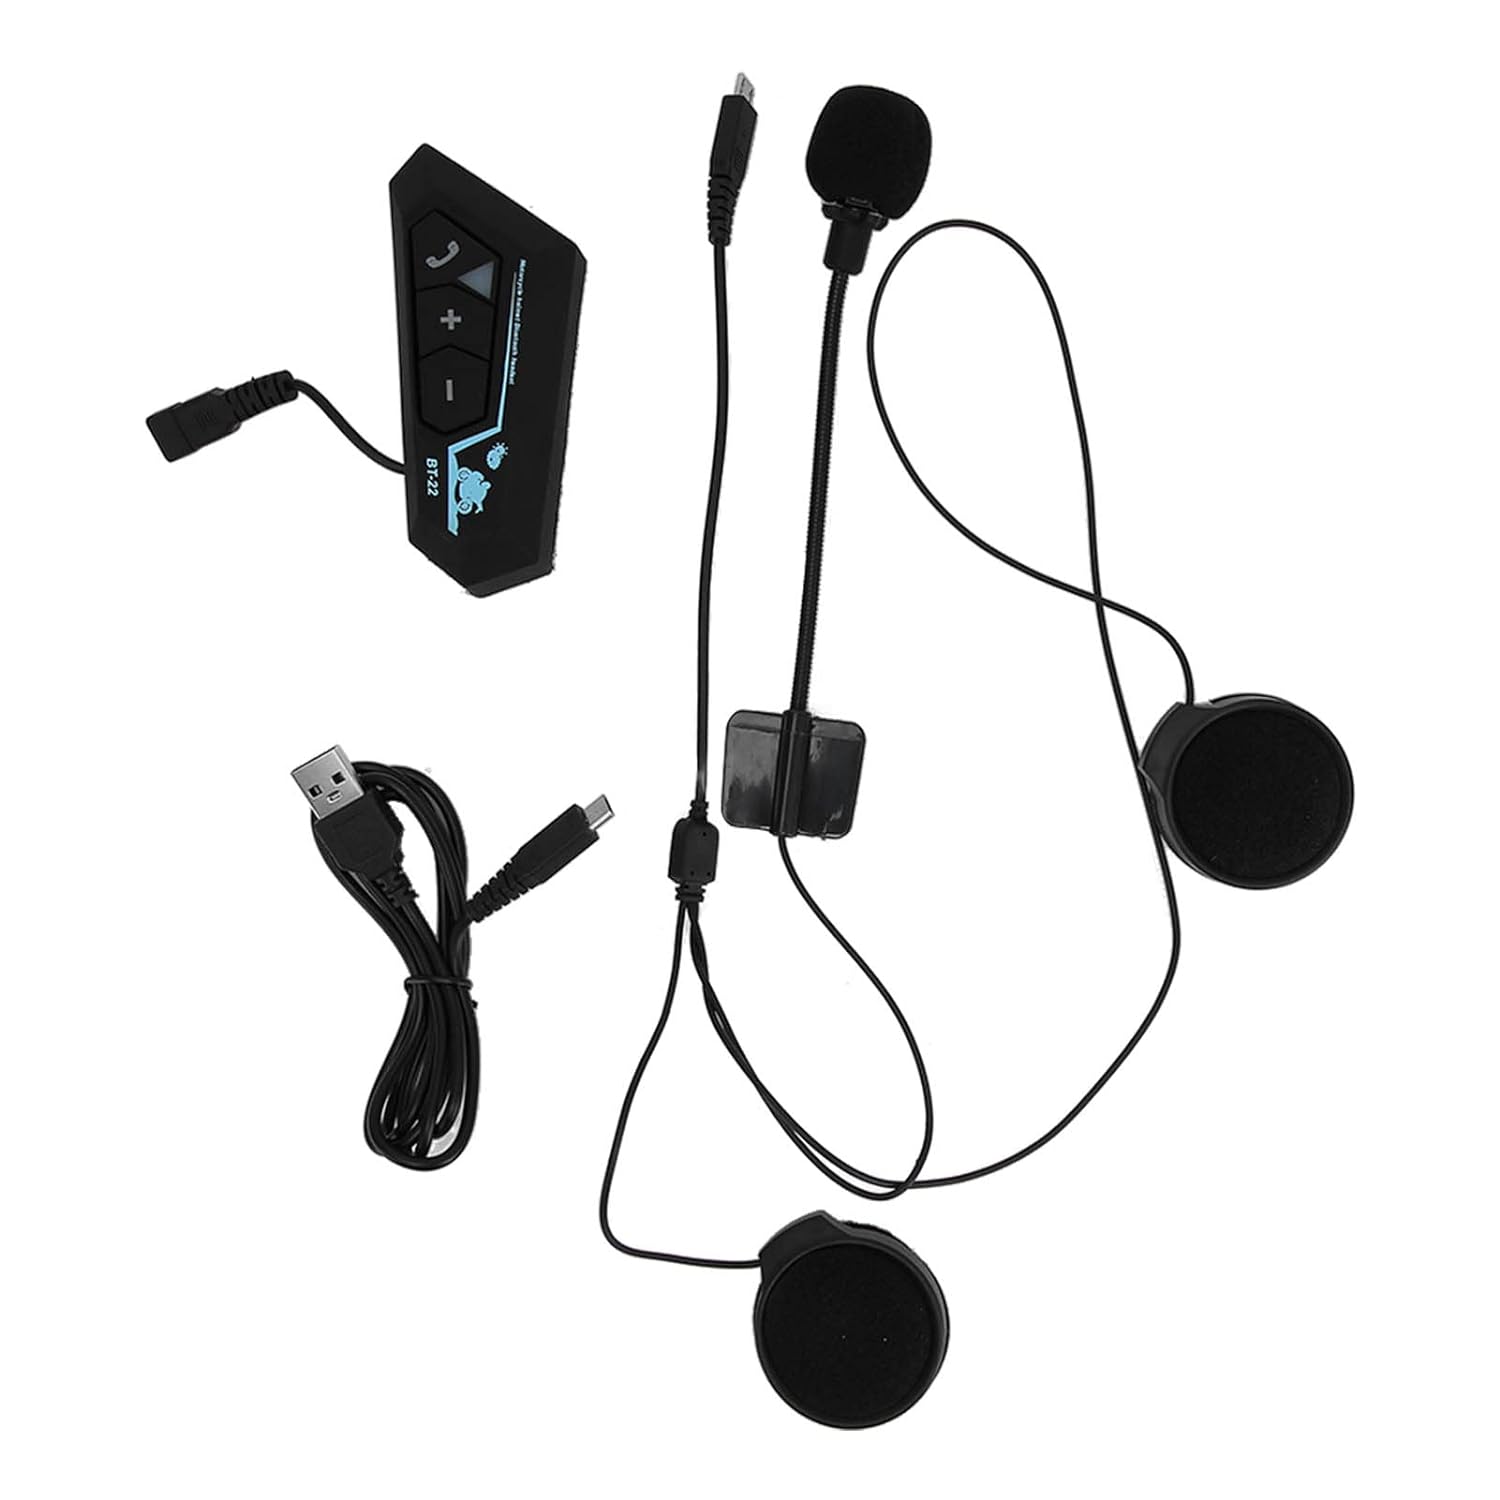 Bluetooth Headset for Helmet, BT22 Motorcycle Helmet Earphones 820 mAh Battery Automatic Response Noise Reduction Compatible with Intercom Connection Helmet Headset